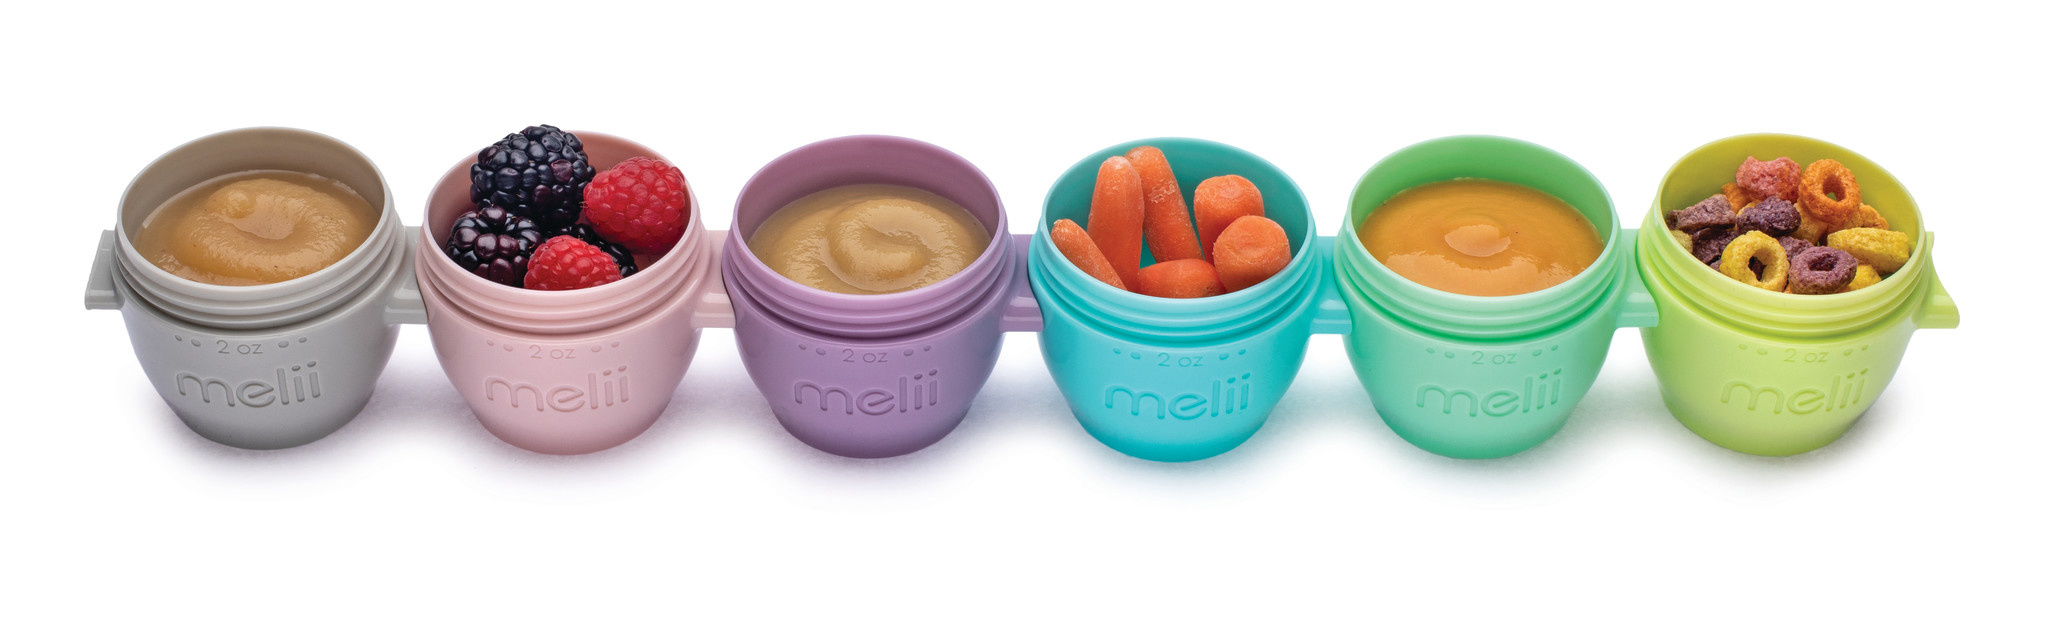 melii Snack and Go Pods Portable sealed baby food container